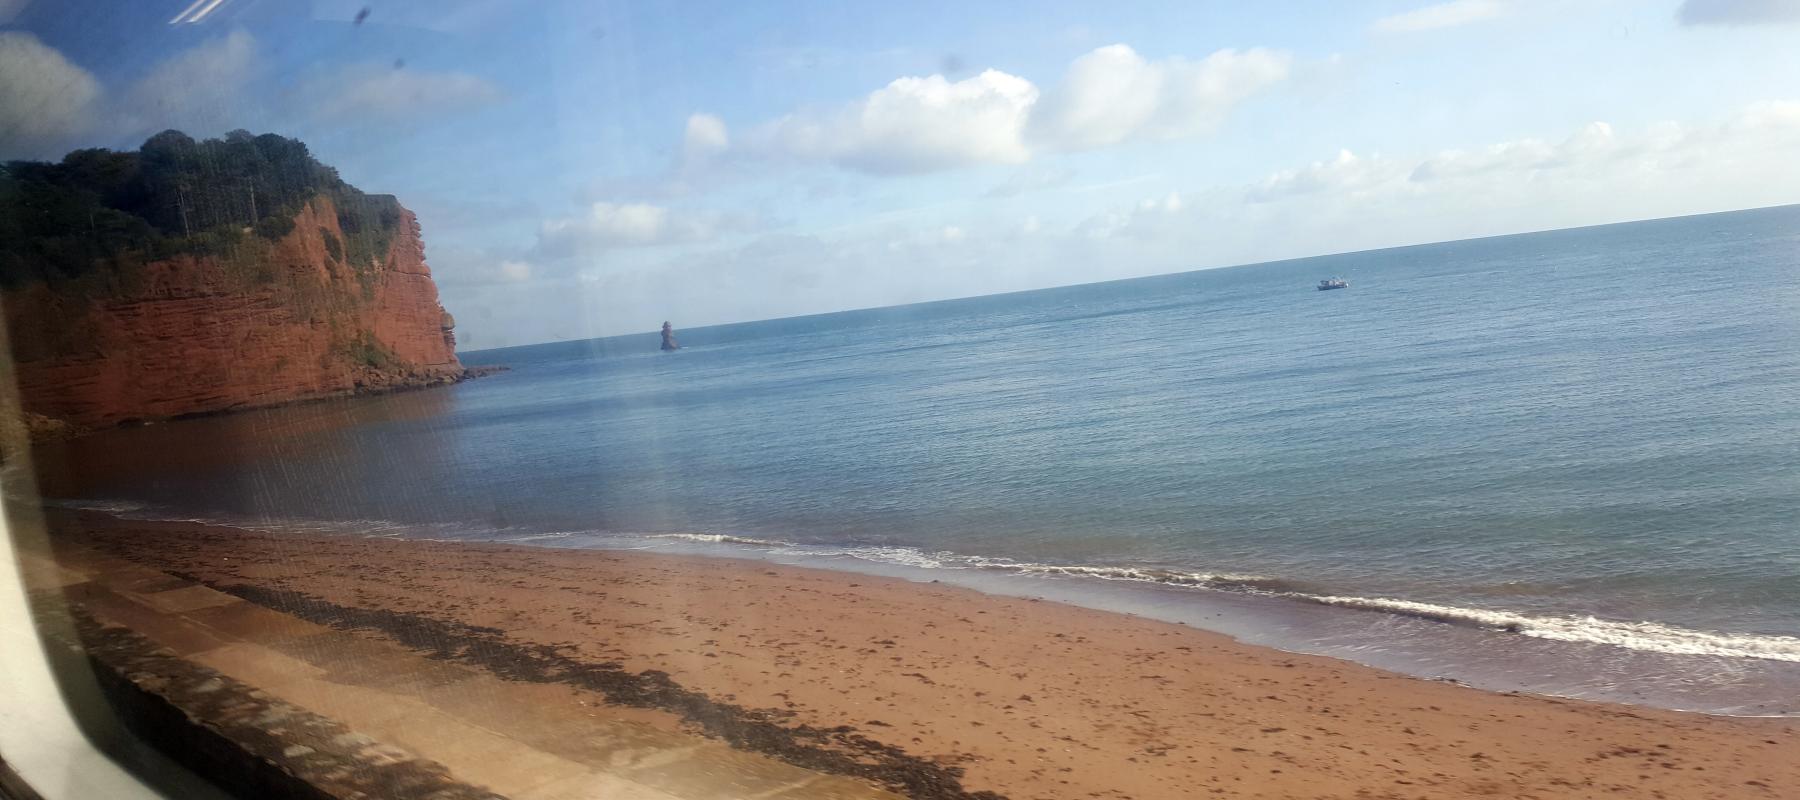 Travelling to Cornwall by rail